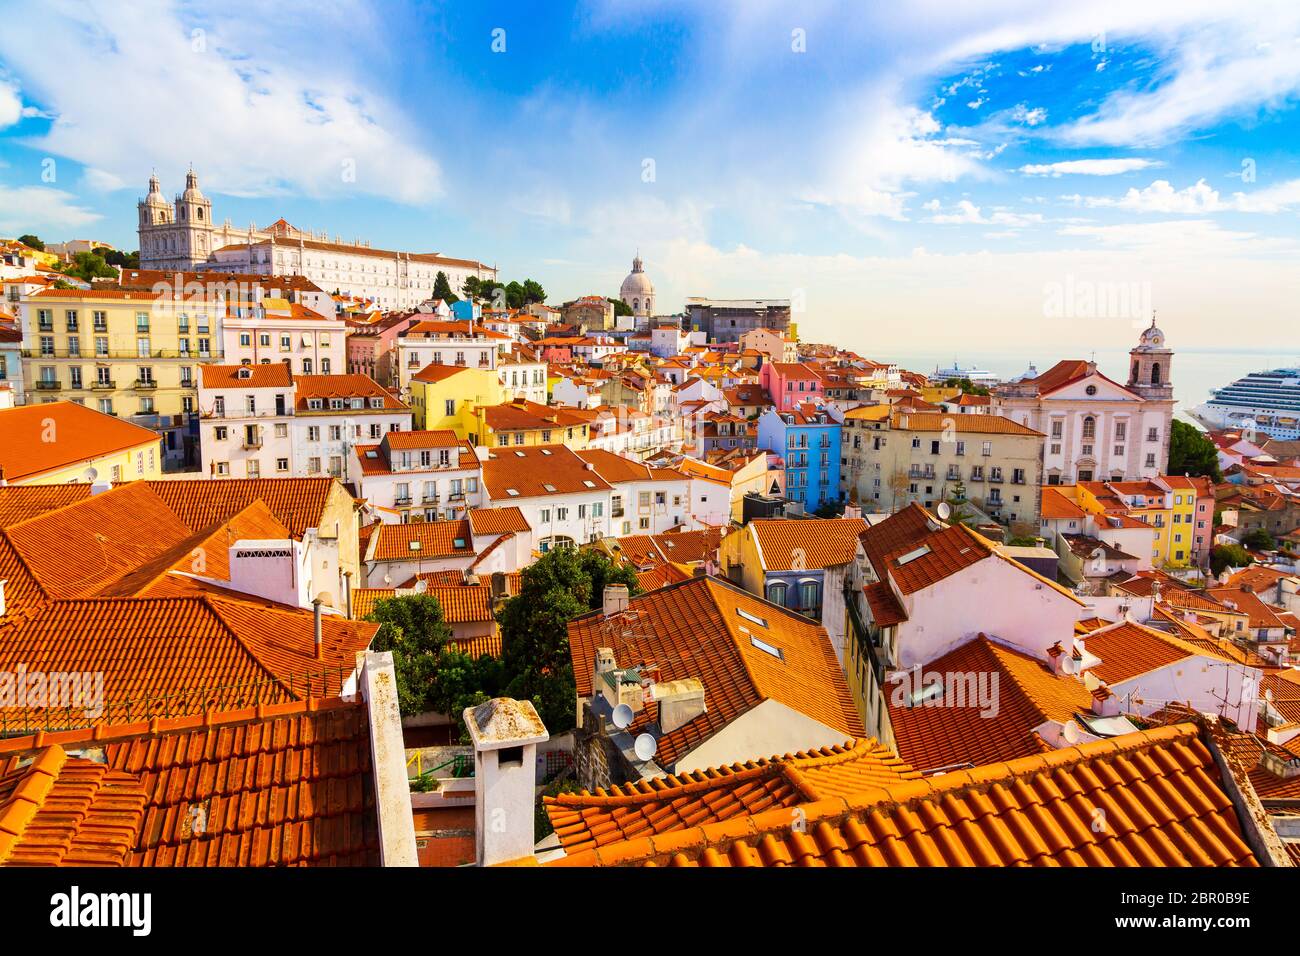 Alfama old town district viewed from Miradouro das Portas do Sol observation point in Lisbon, Portugal Stock Photo